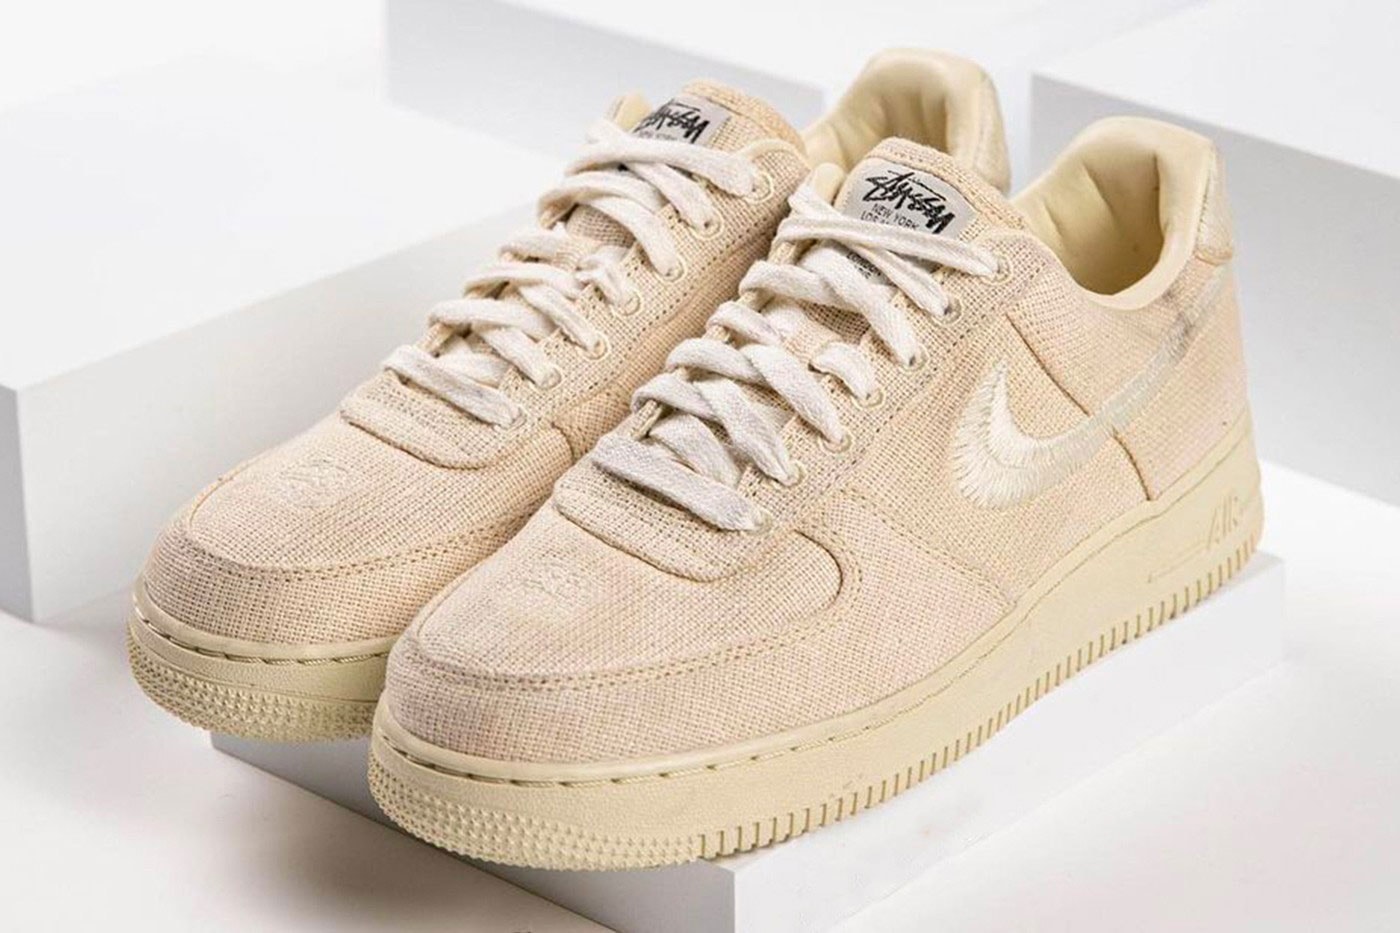 Stussy x Nike Air Force 1 Low Beige Fossil Stone